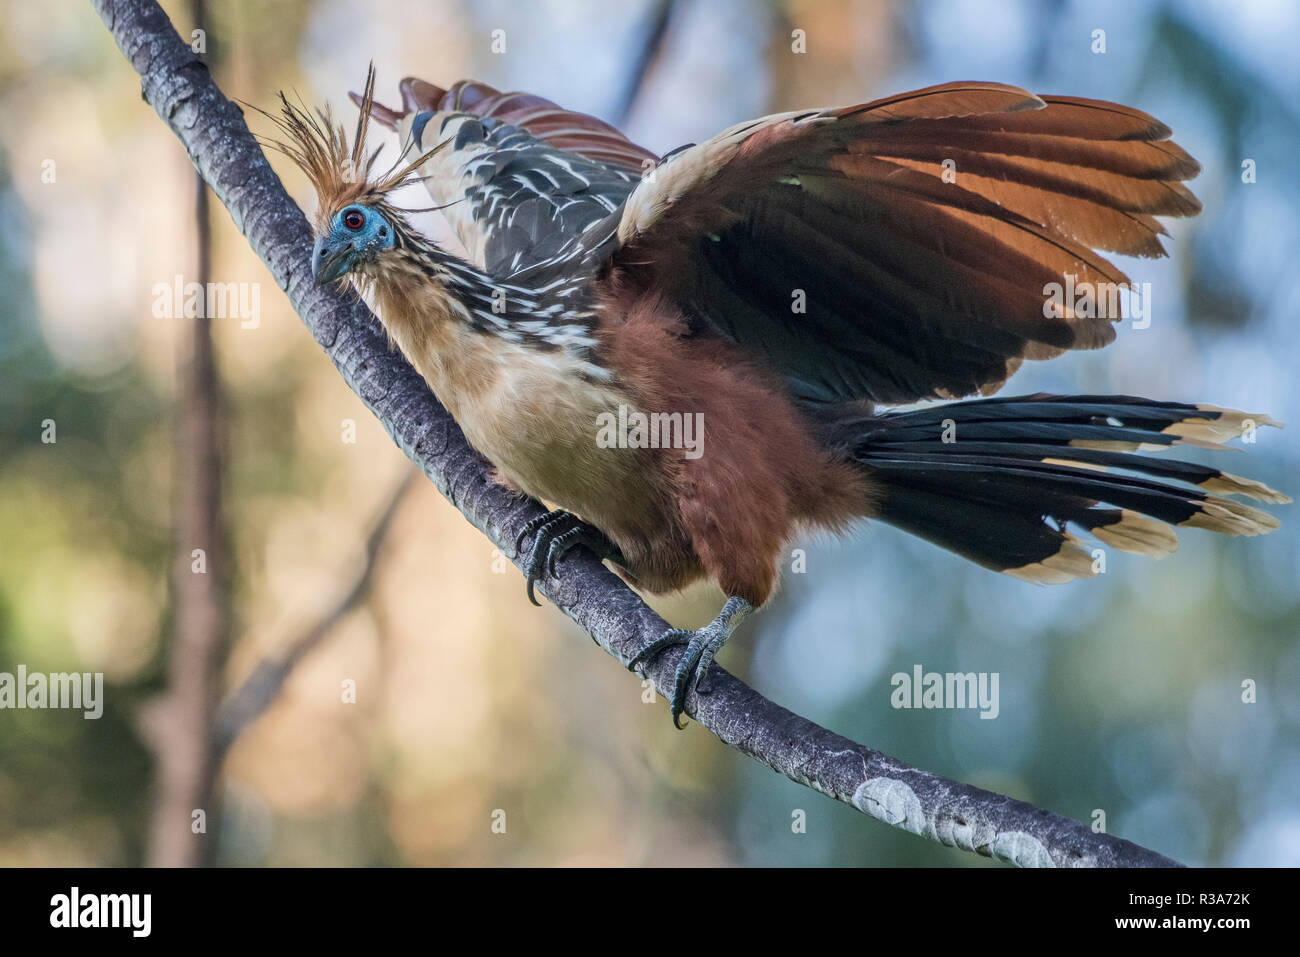 Hoatzin (Opisthocomus hoazin) is a species of bird often found around oxbow lakes and other water bodies in the Amazon. This one is from Los Amigos. Stock Photo